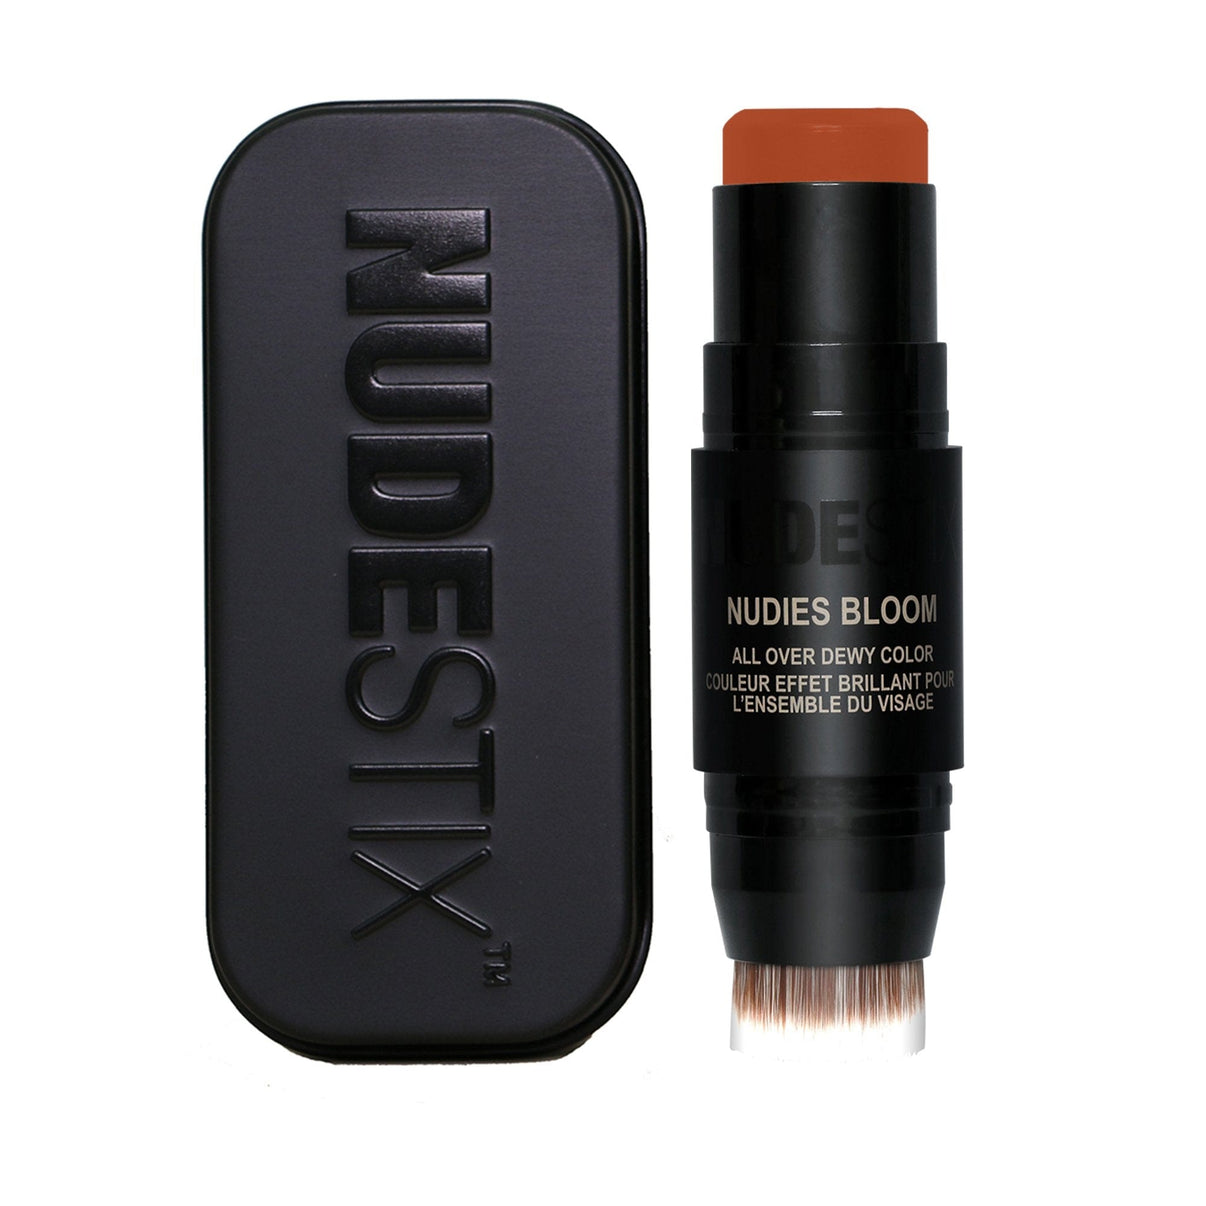 Nudies Bloom in日陰 Rusty Rouge with Nudestix can